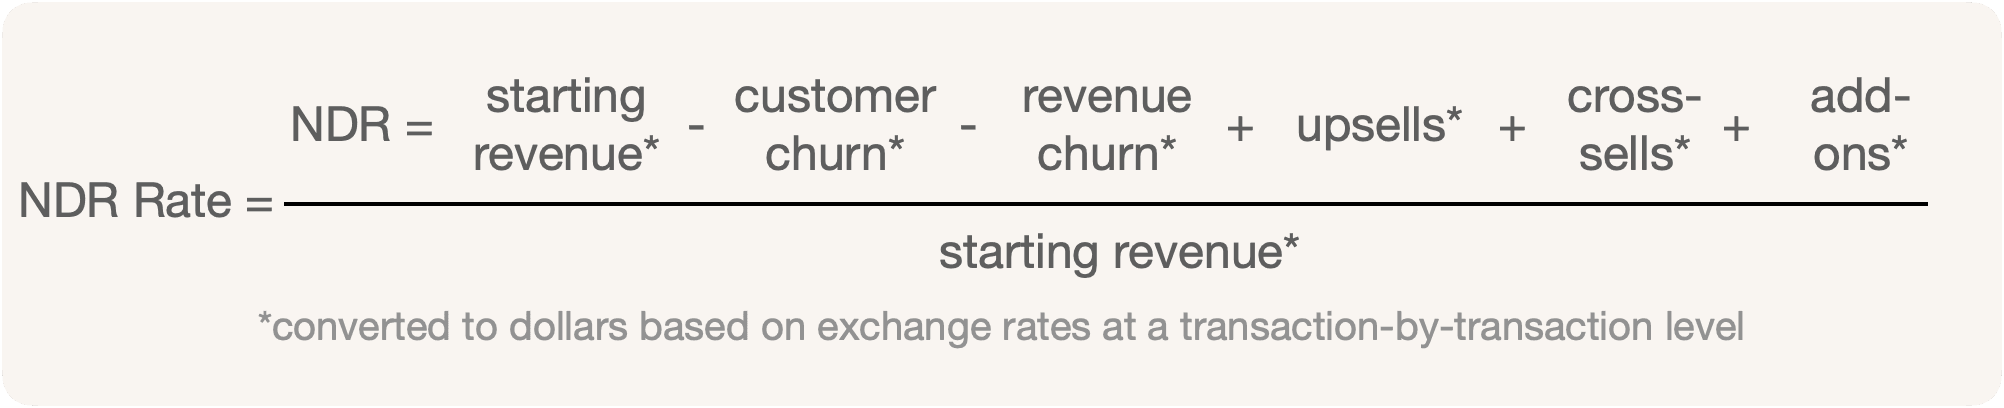 NDR rate is the ratio of NRR and starting revenue, taking into account day-to-day currency fluctuations exchange rates.